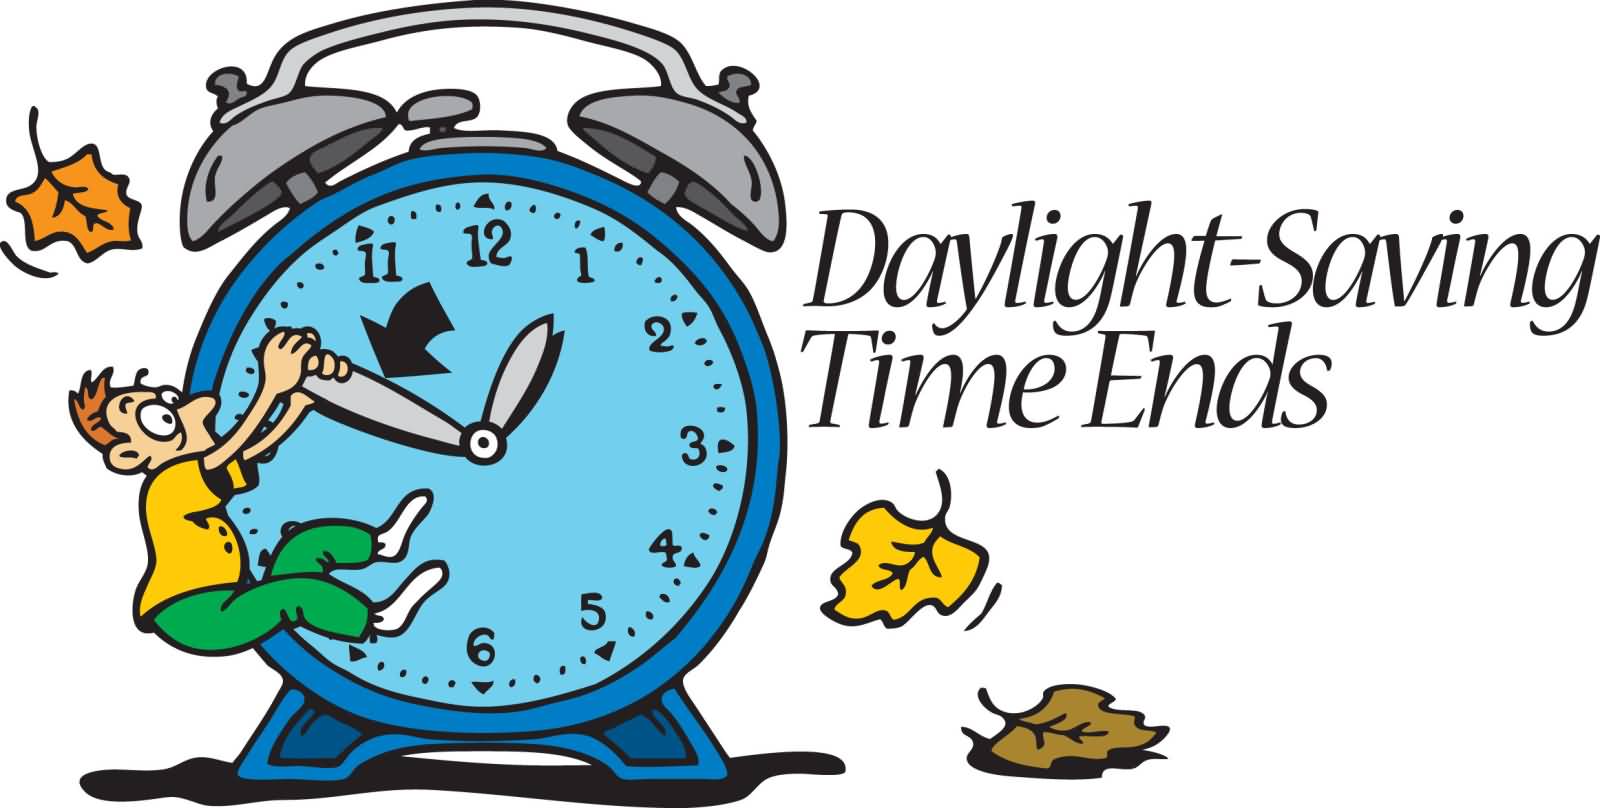 Best Daylight Saving Time Ends Pictures And Image